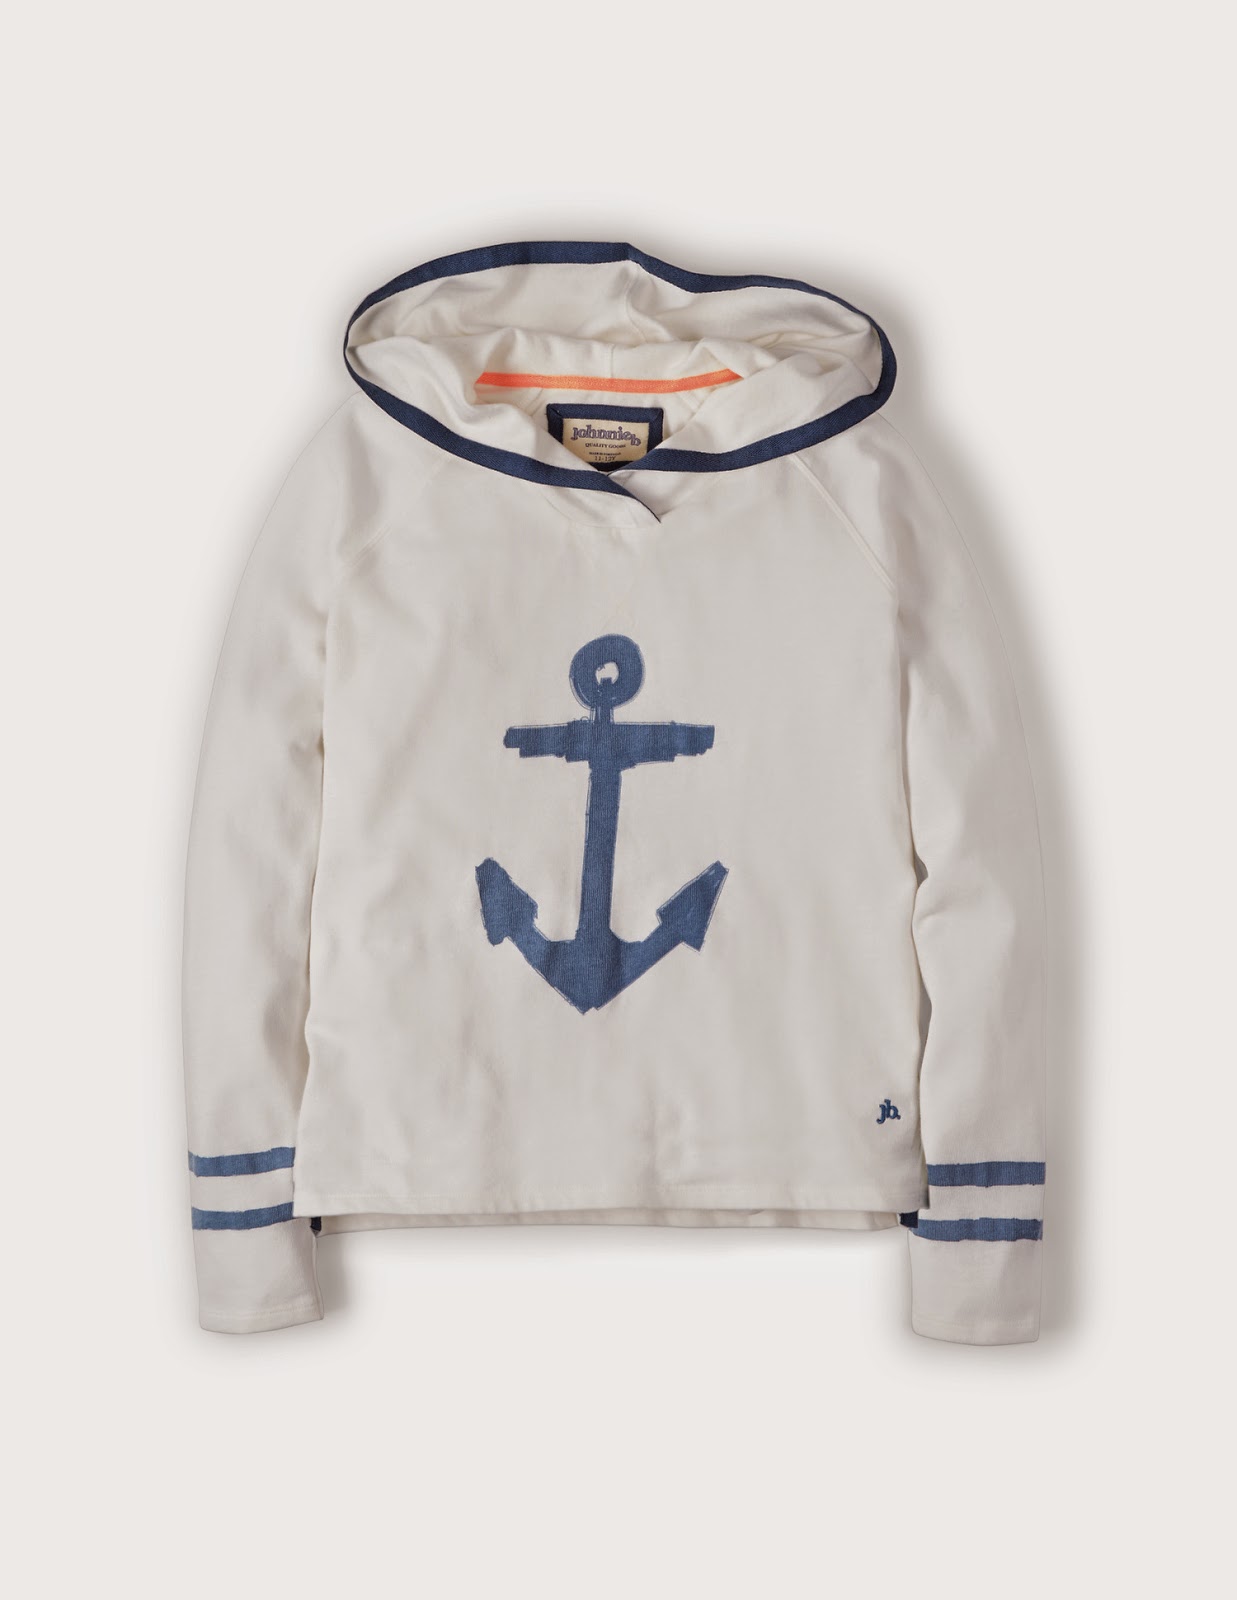 Boden Nautical New Arrivals Spring 2015